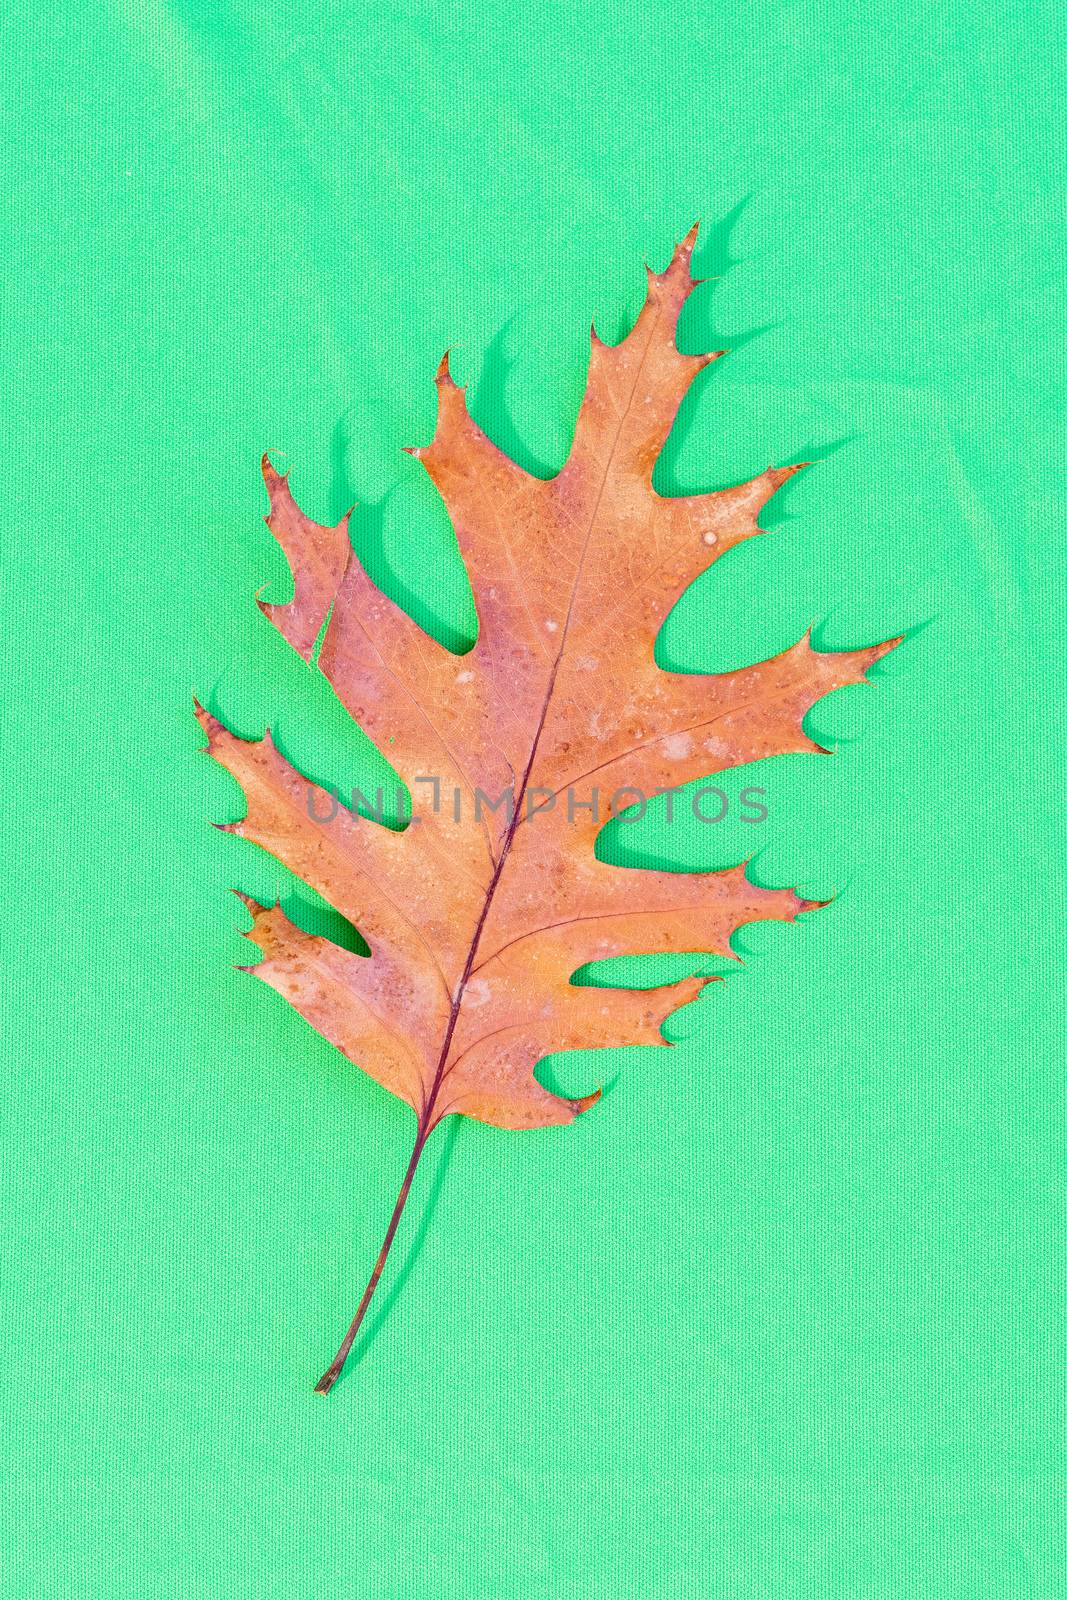 A brown leaf placed on a colored background by brambillasimone